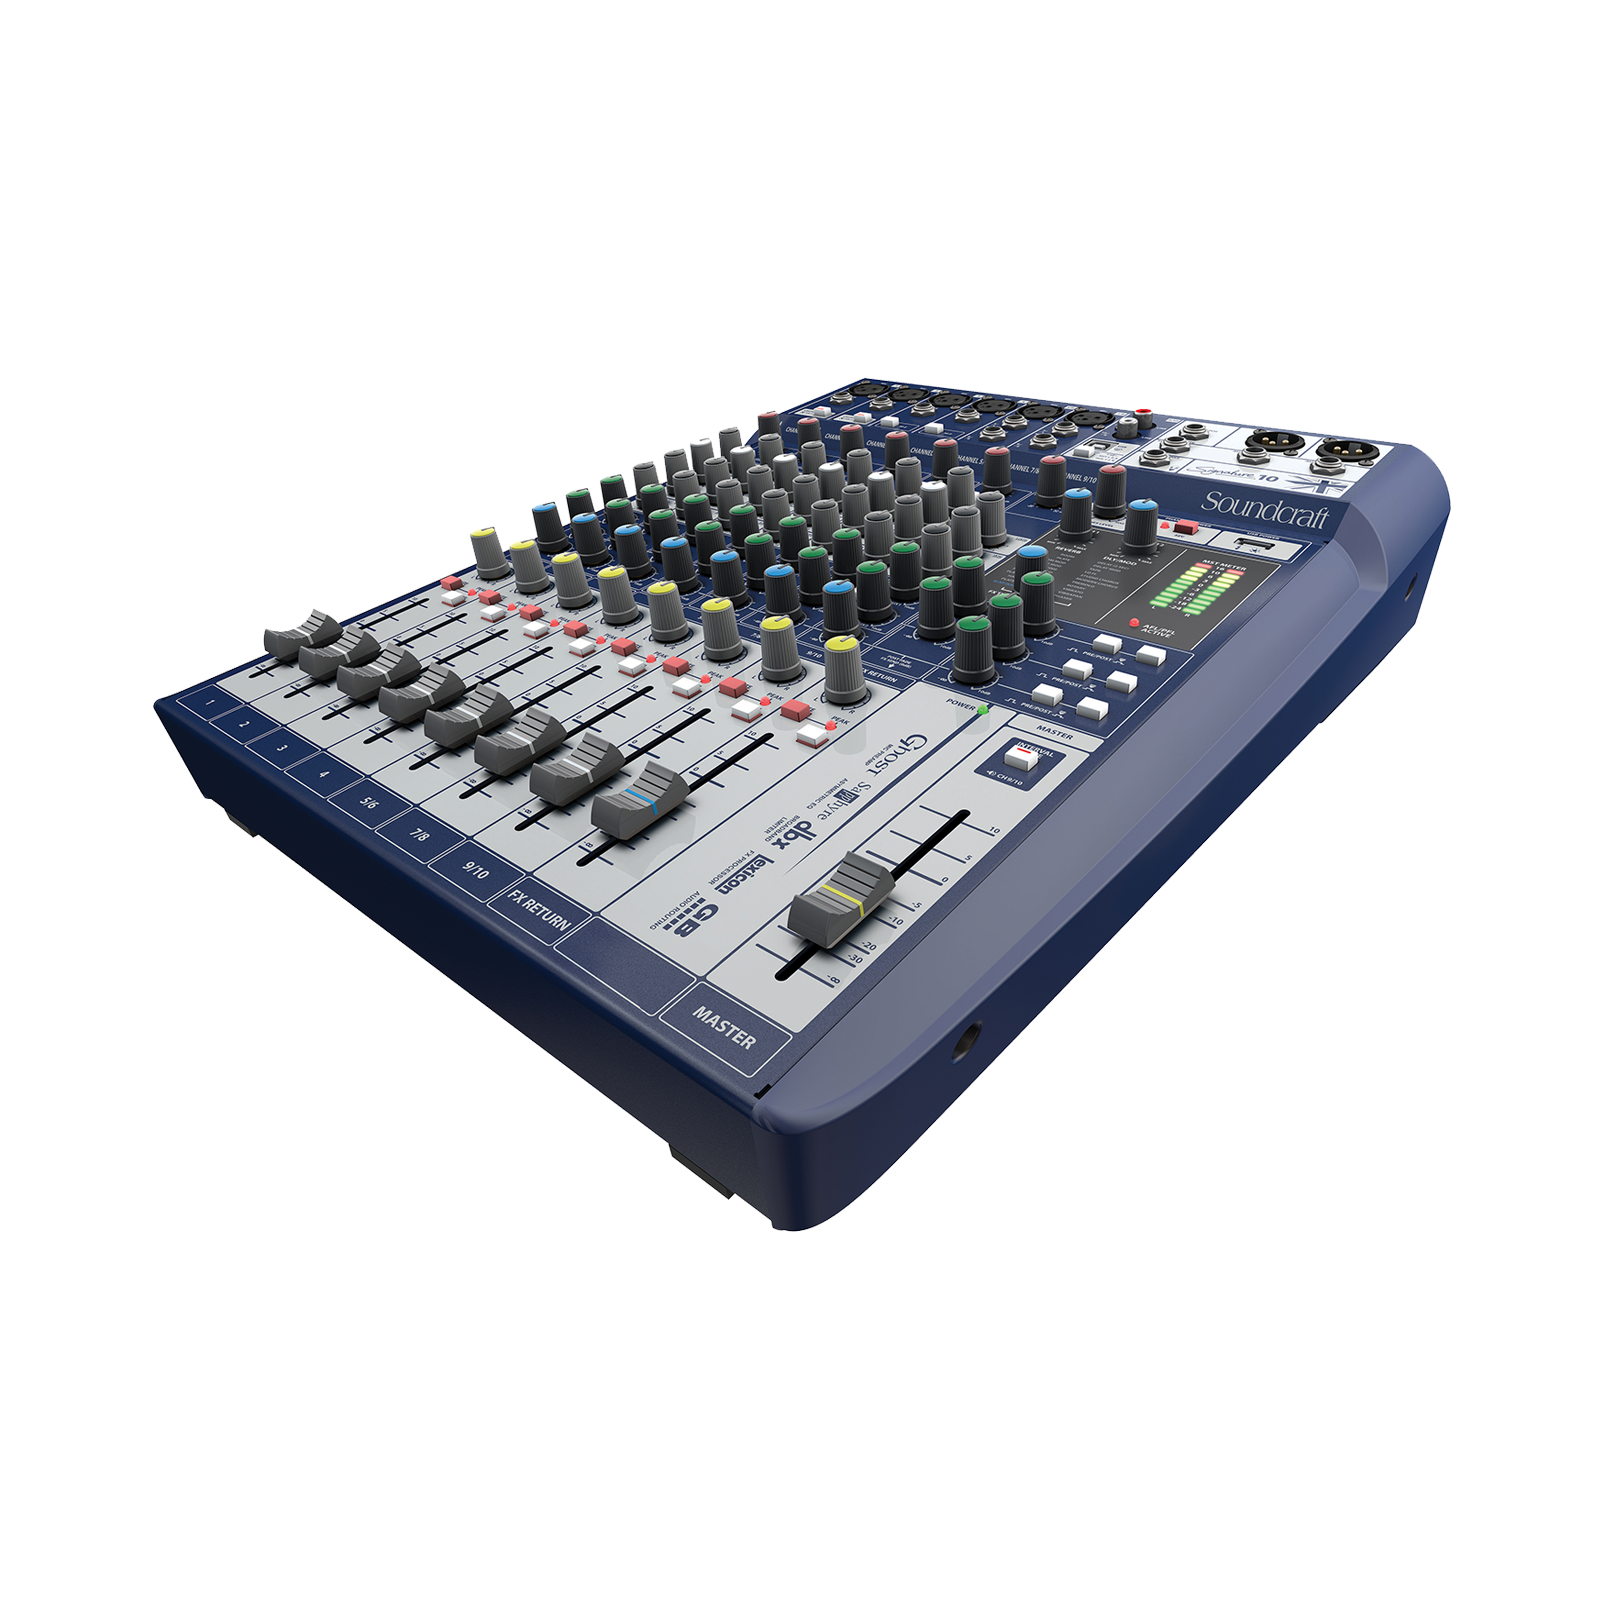 Signature 10 - Dark Blue - 10-input small format analogue mixer with onboard effects - Hero